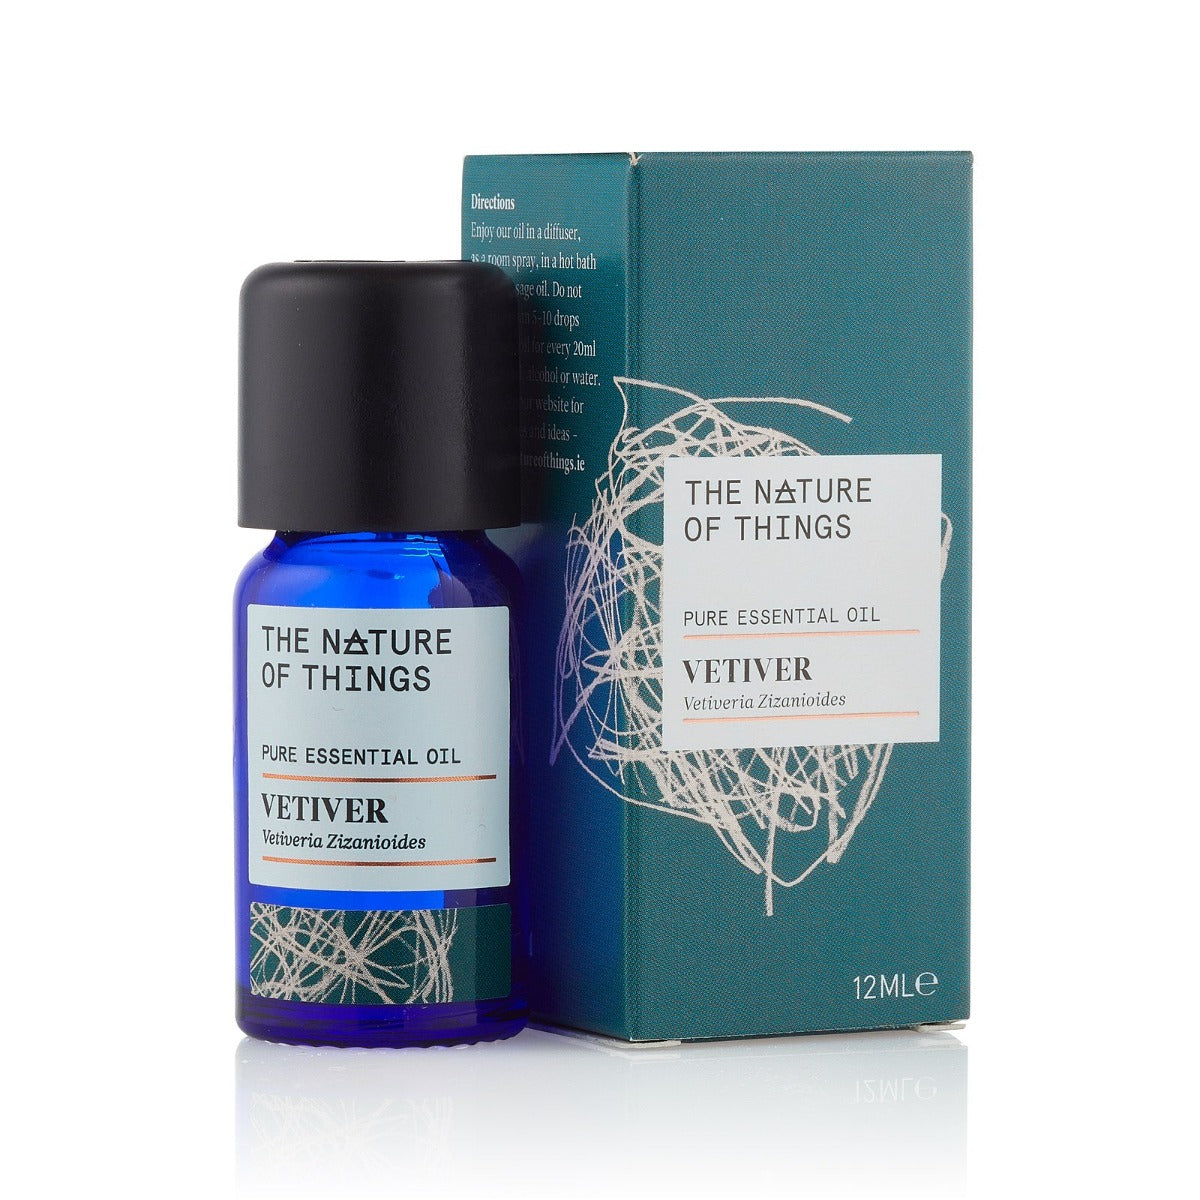 Organic Vetiver Essential Oil from The Nature of Things